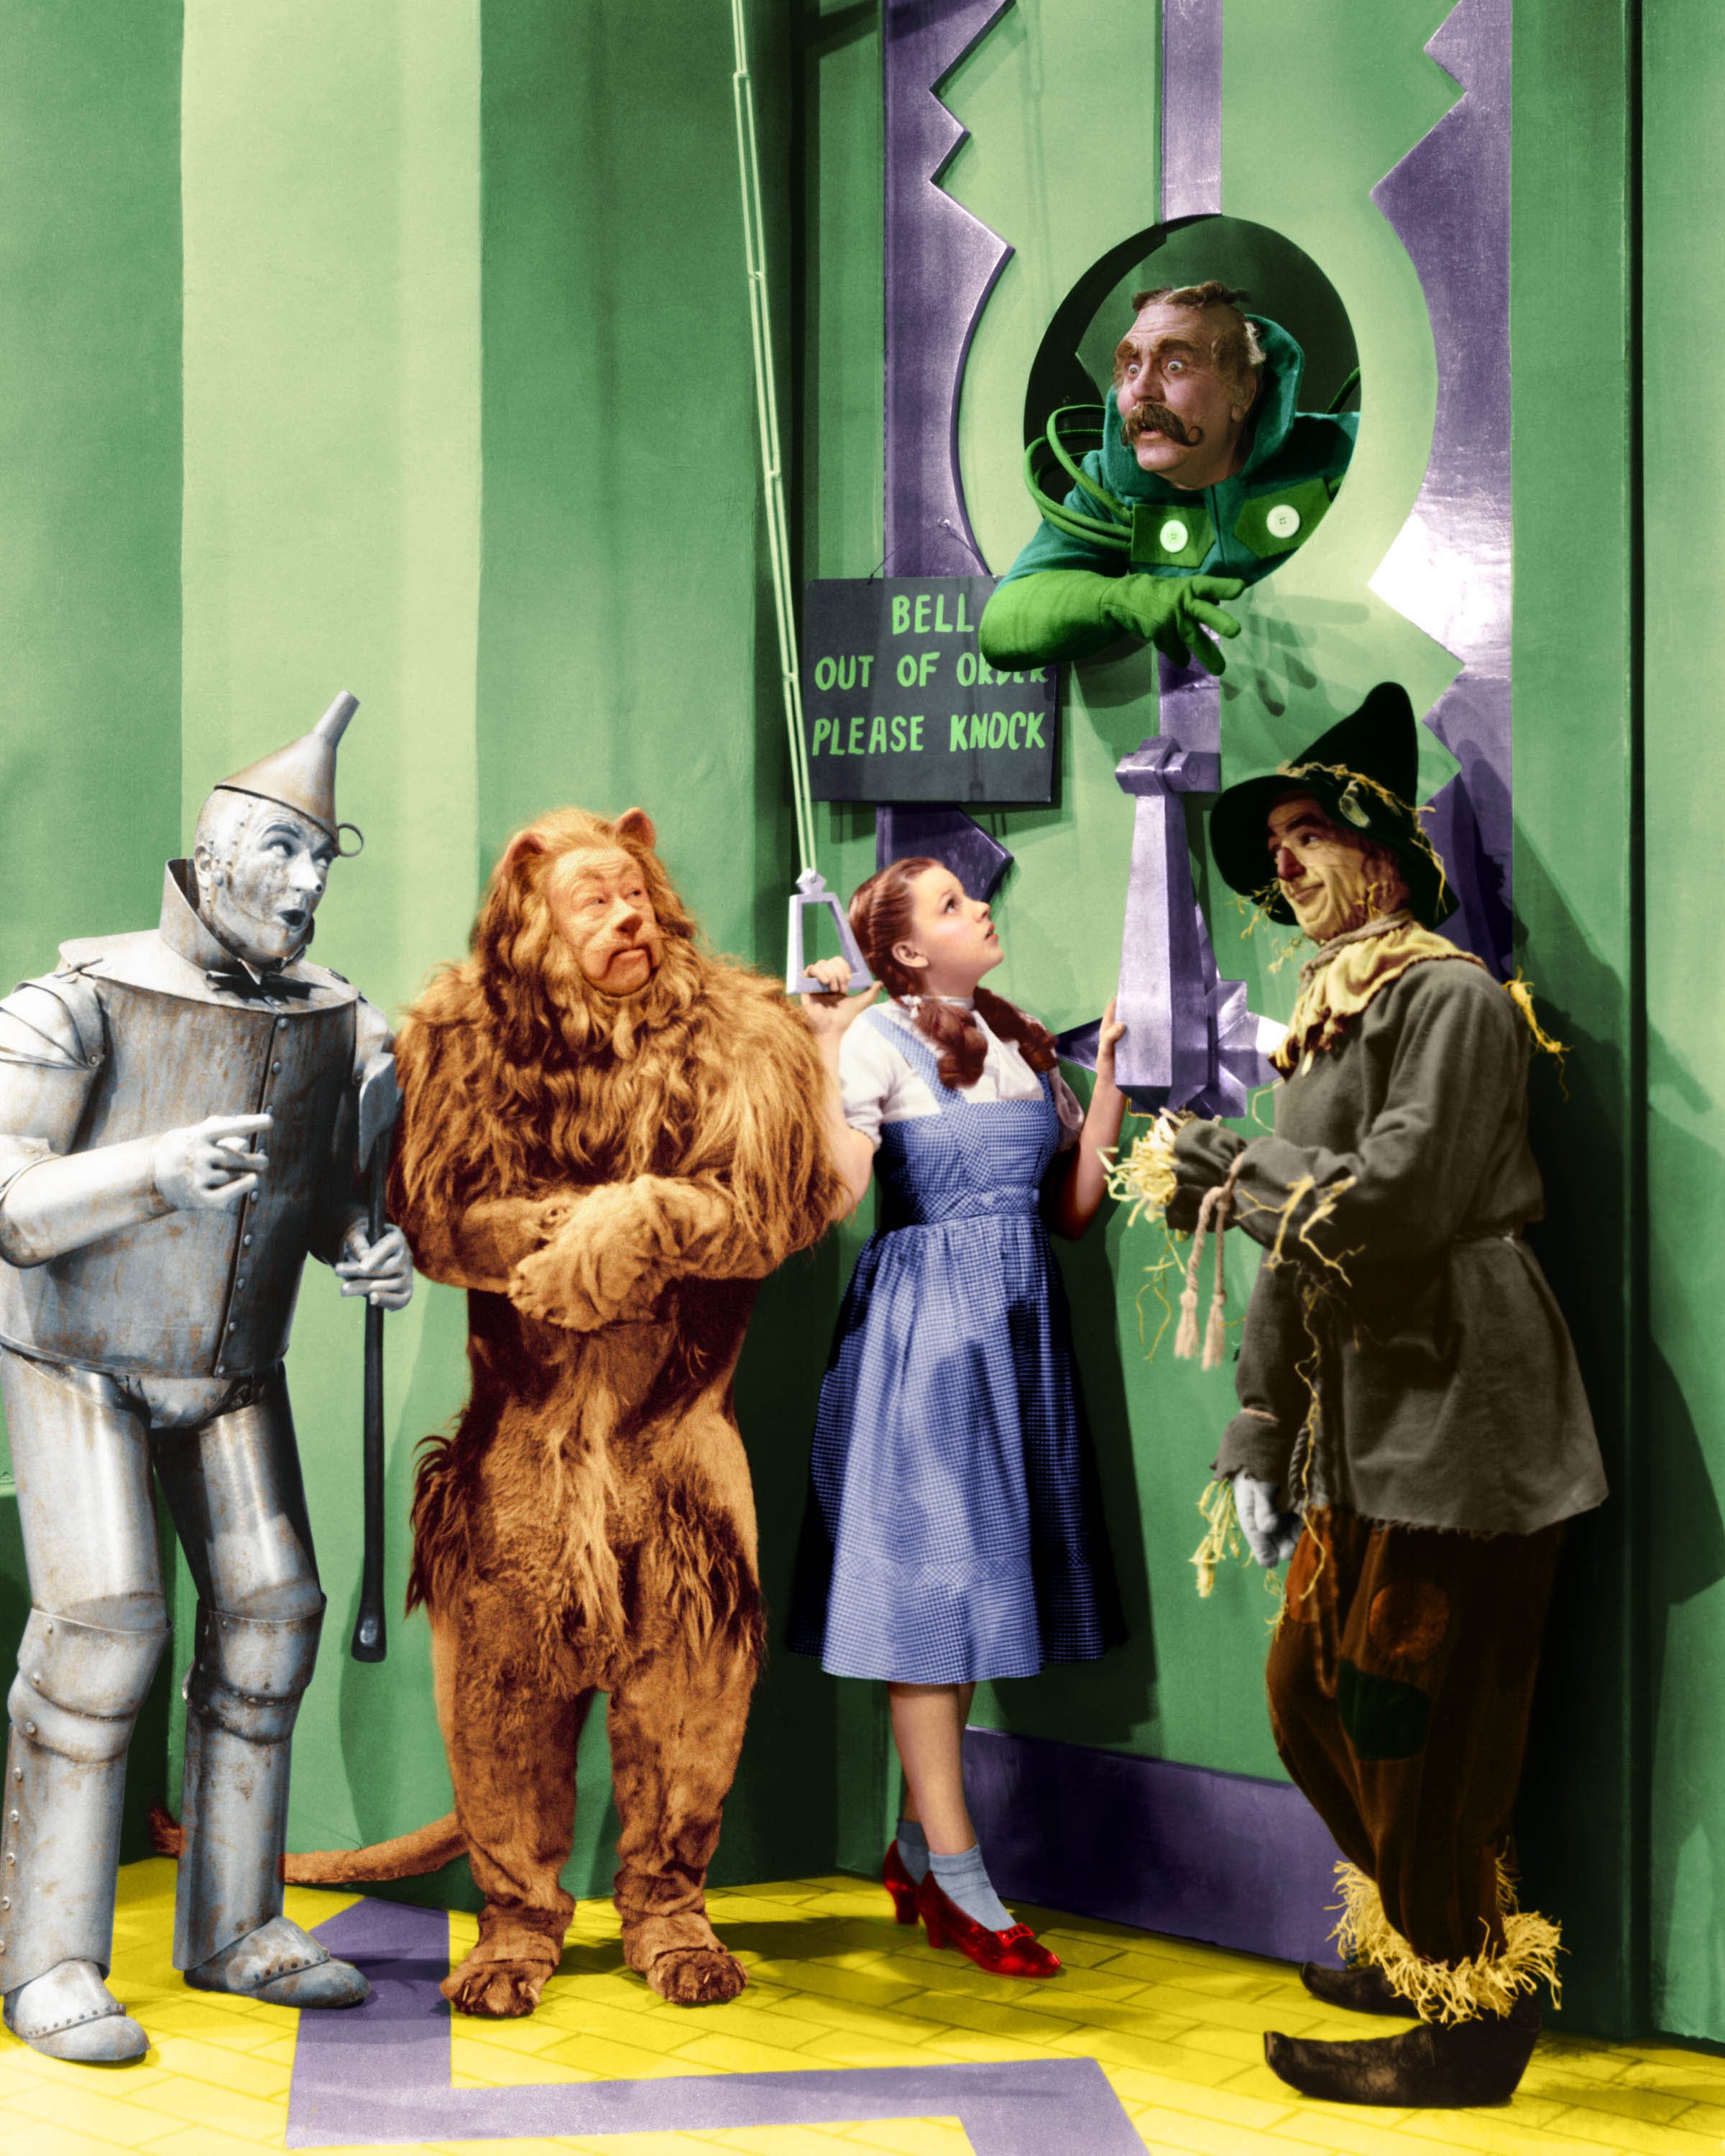 WIZARD OF OZ 8 x 10 IN GUARDS DISGUISES 